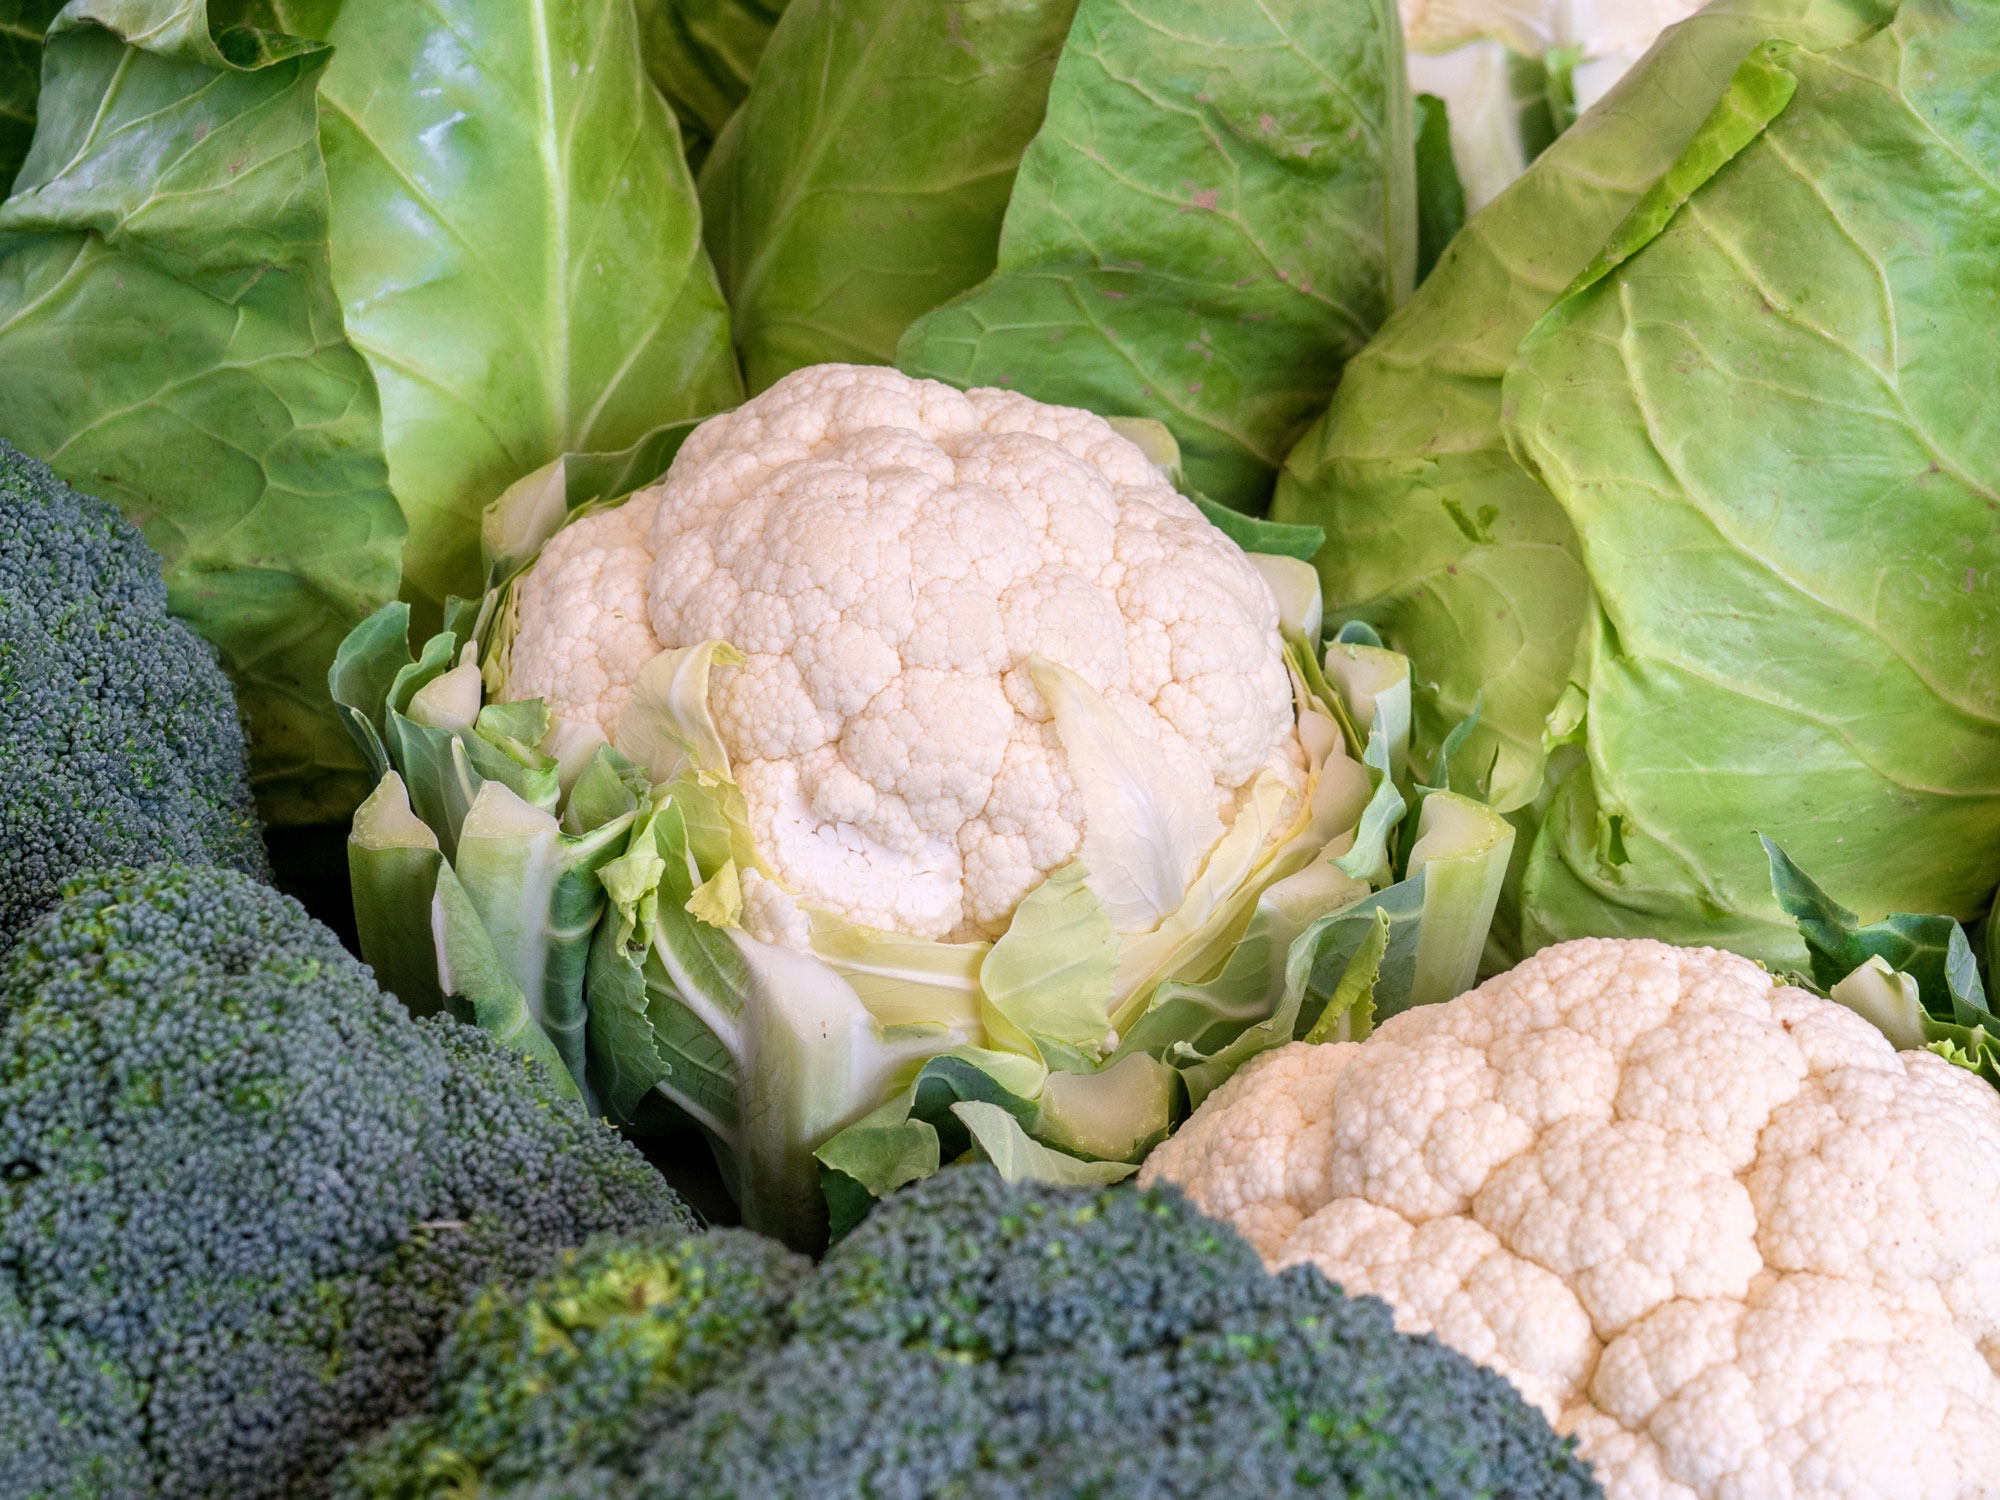 Cruciferous vegetables: The good, the bad and the gas